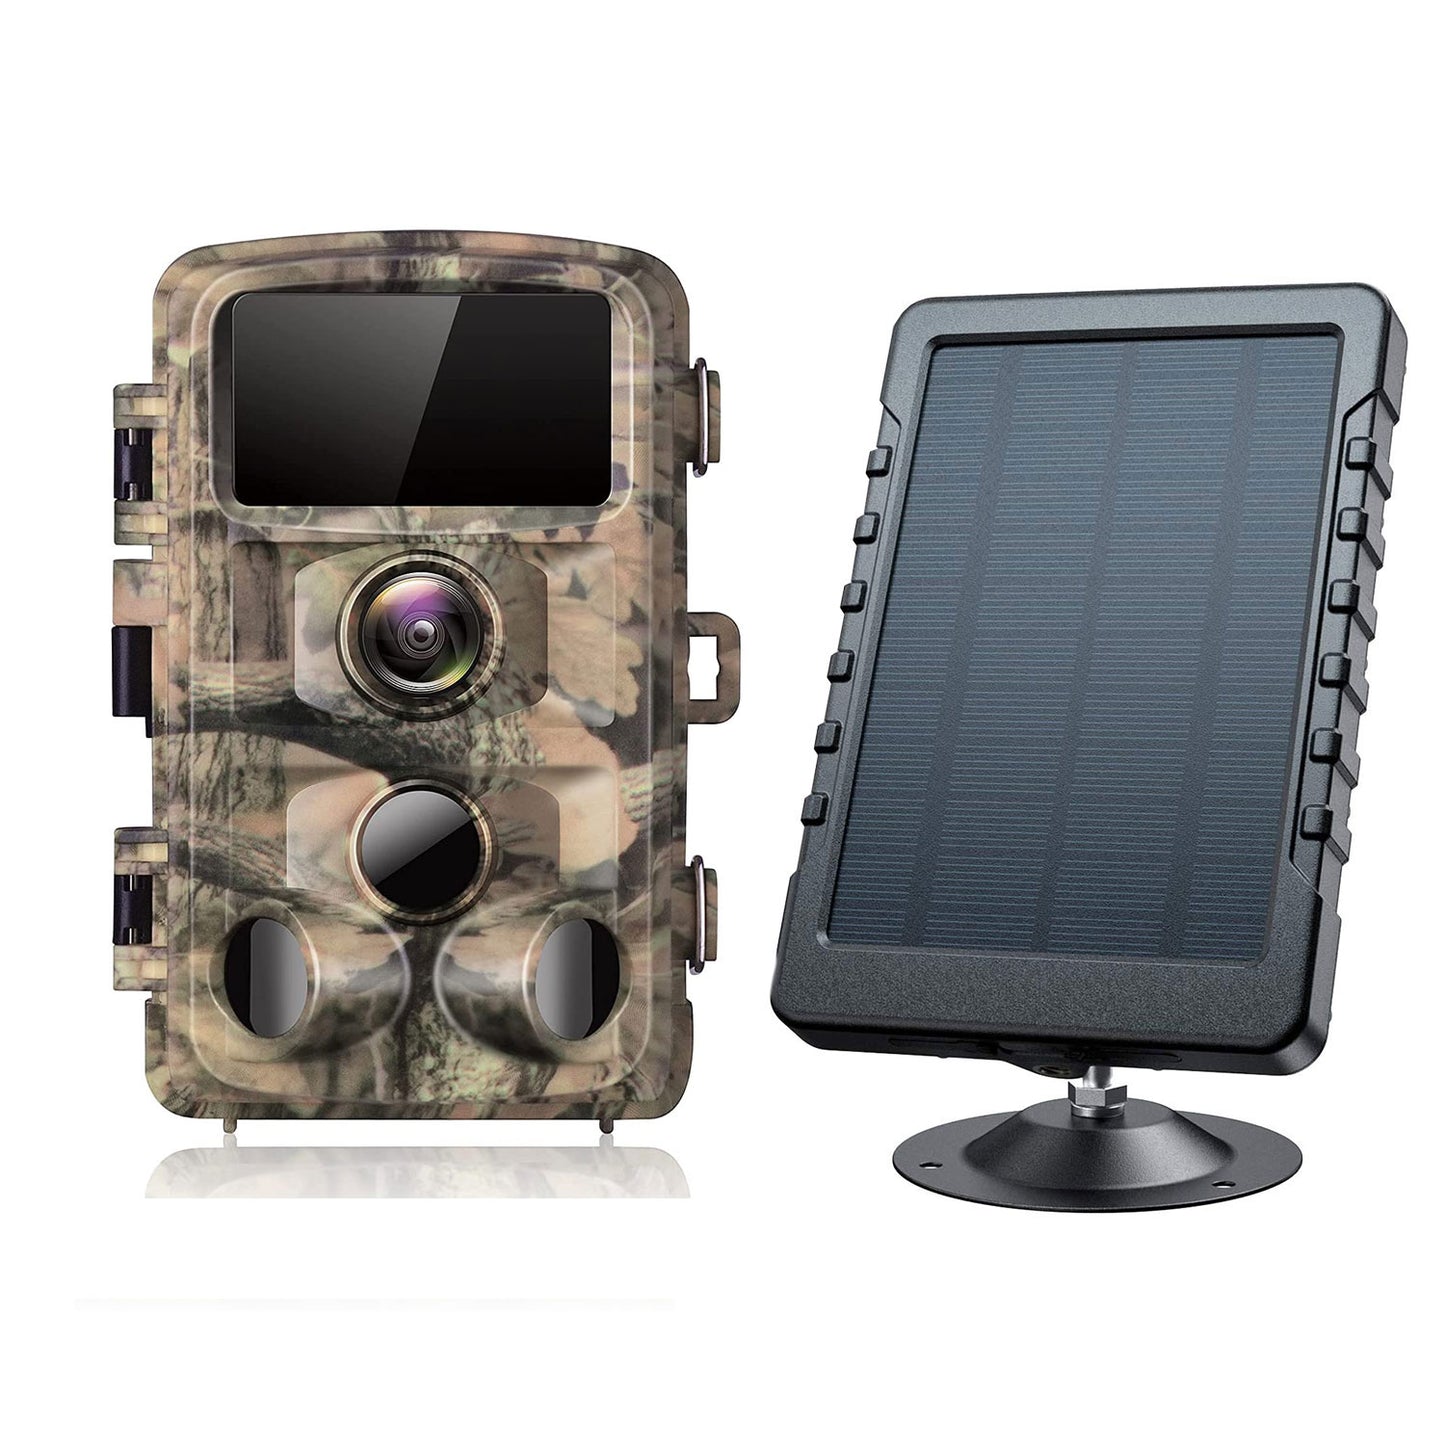 CAMPARK Trail Camera with 3000mAh Solar Panel Bundle 20MP 1080P Deer Hunting Game Camera 3PIR Night Vision Waterproof and Trail Camera Solar Power Bank Fast Portable Charger Waterproof 6V 2A